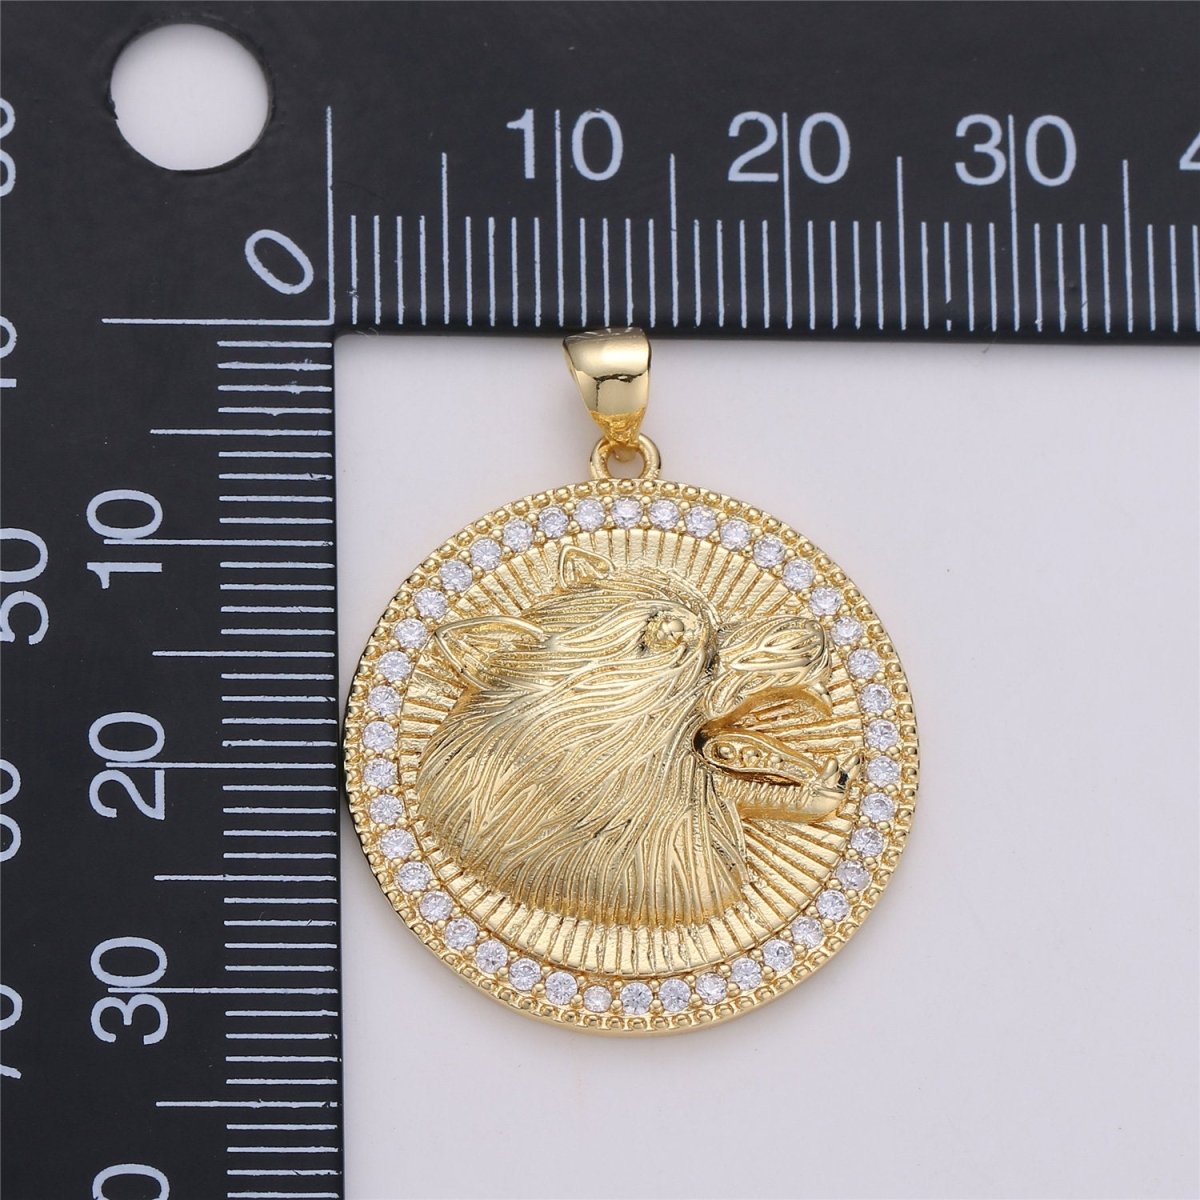 Howling Wolf Charm - 24k gold Filled Medallion Pendant The Wolf of Wall Street Pendant, Micro Pave Wolf Moon Charm for Statement Necklace I-579 - DLUXCA